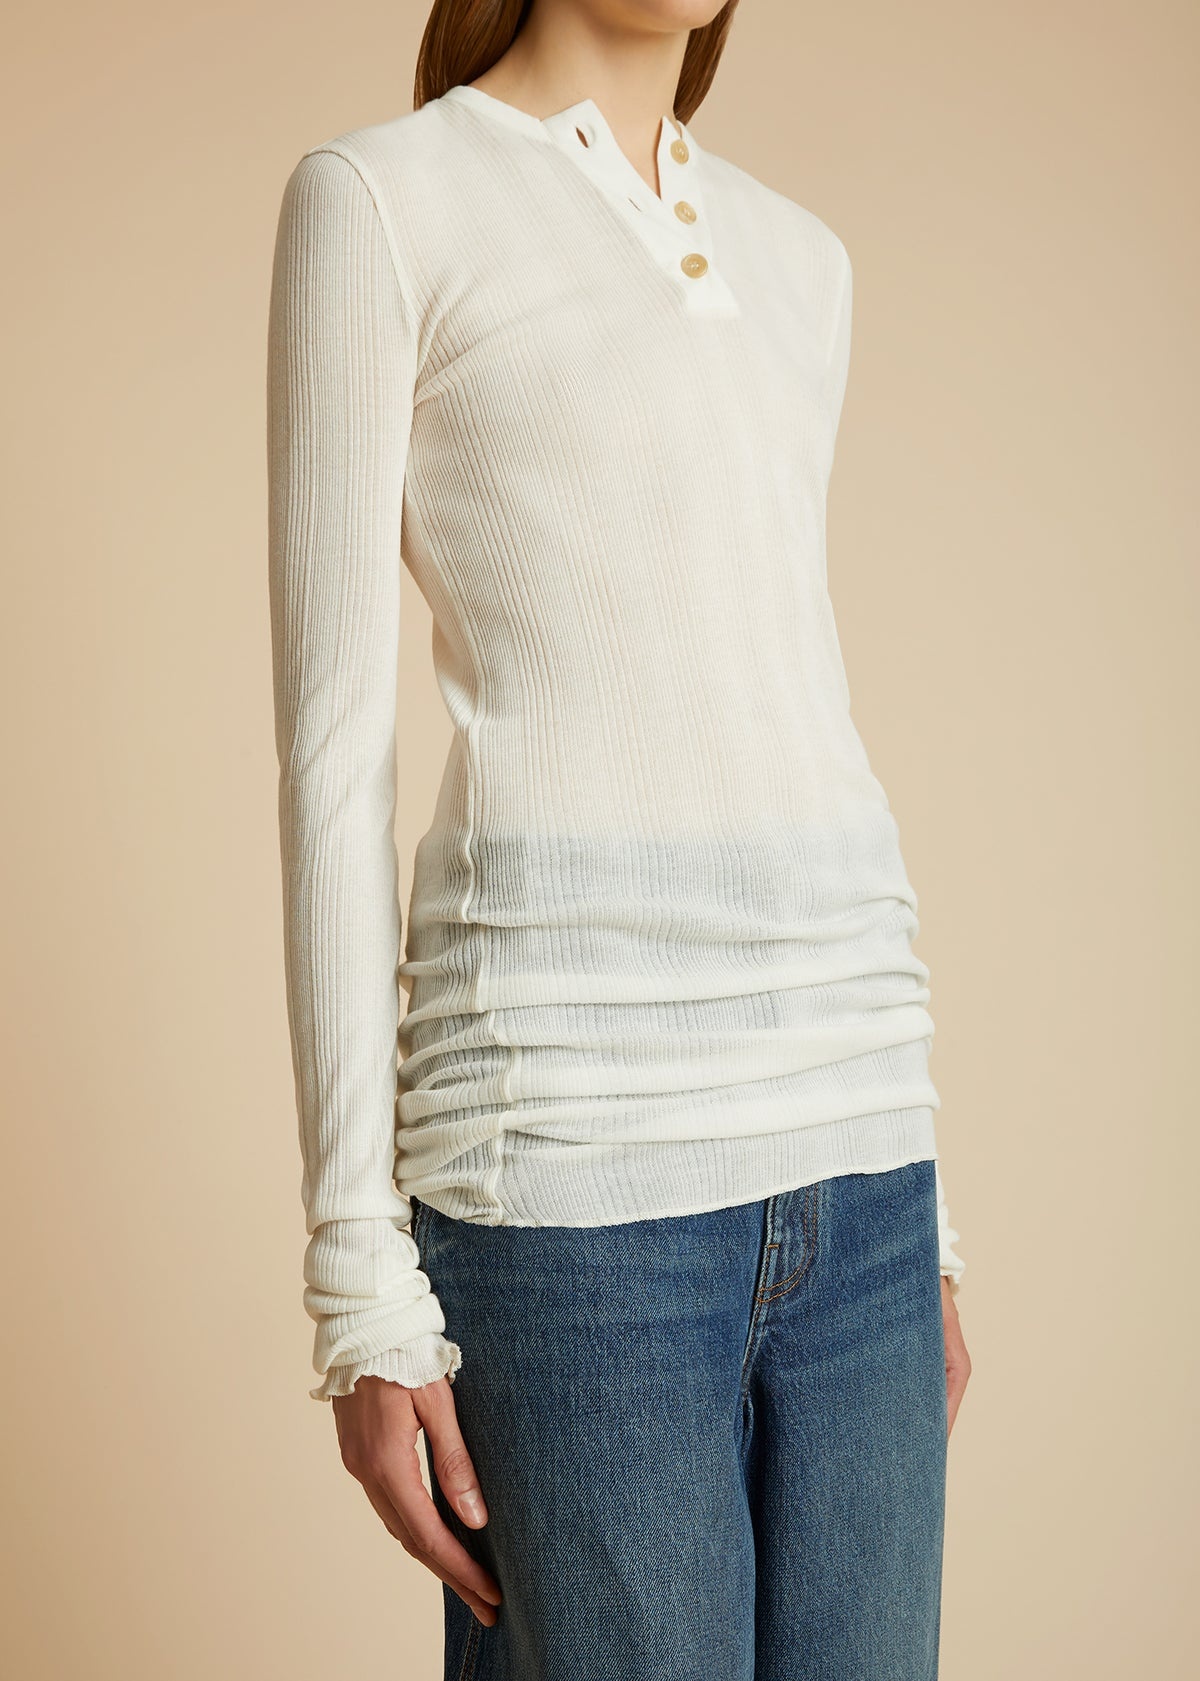 The Byron Top in Cream - 4